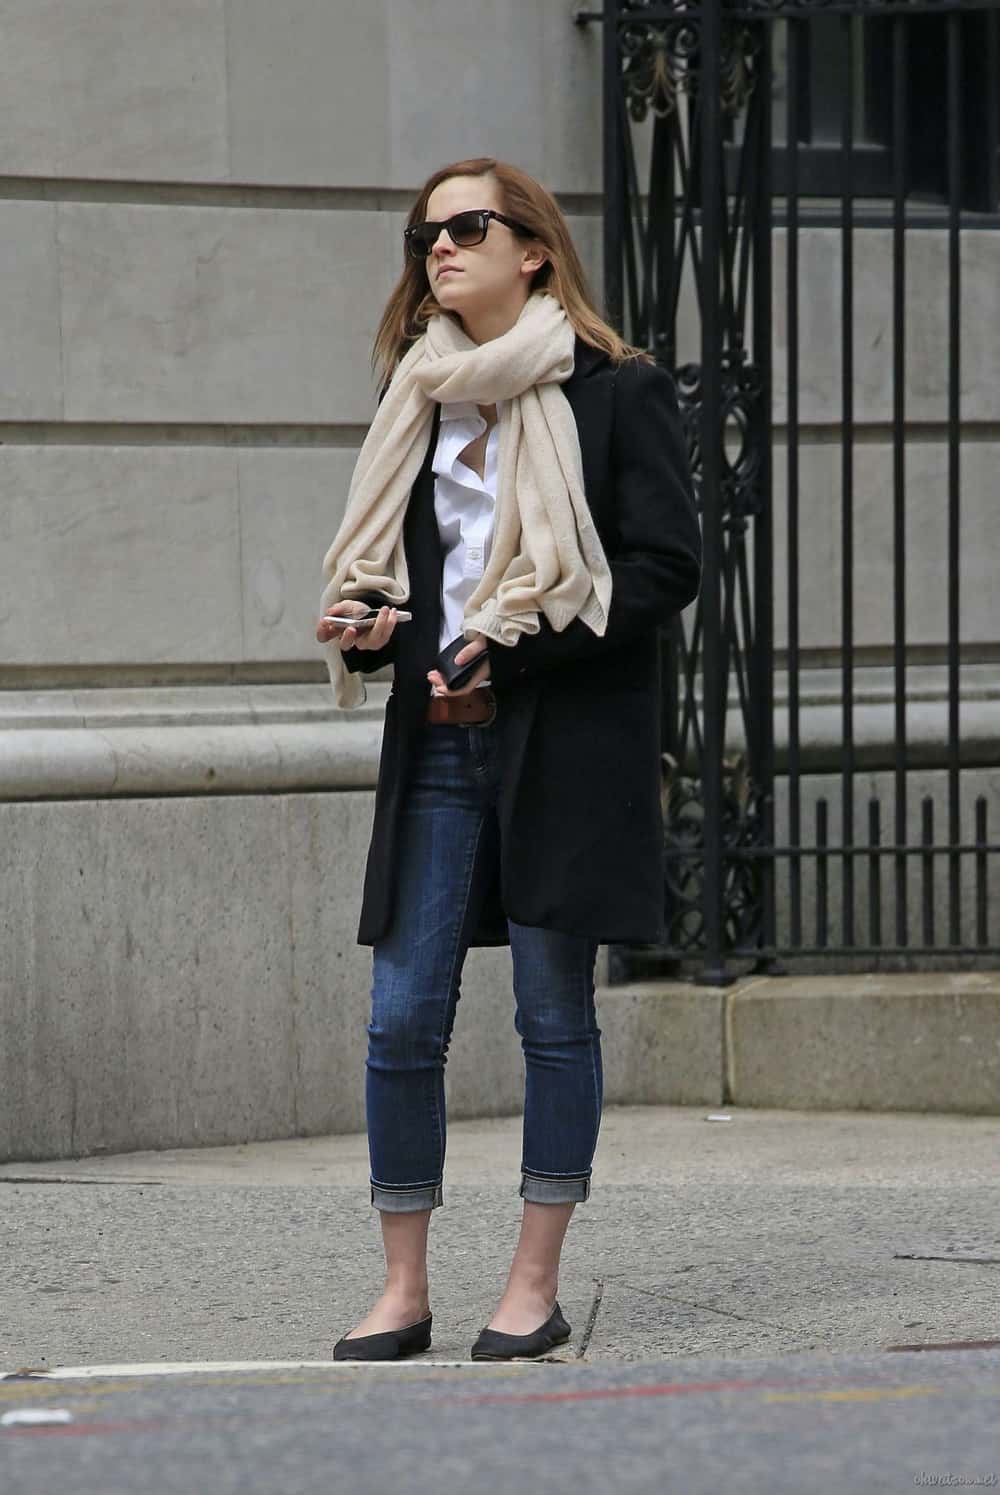 Emma Watson Looked Stylish in Streetwear while Out and About in Manhattan